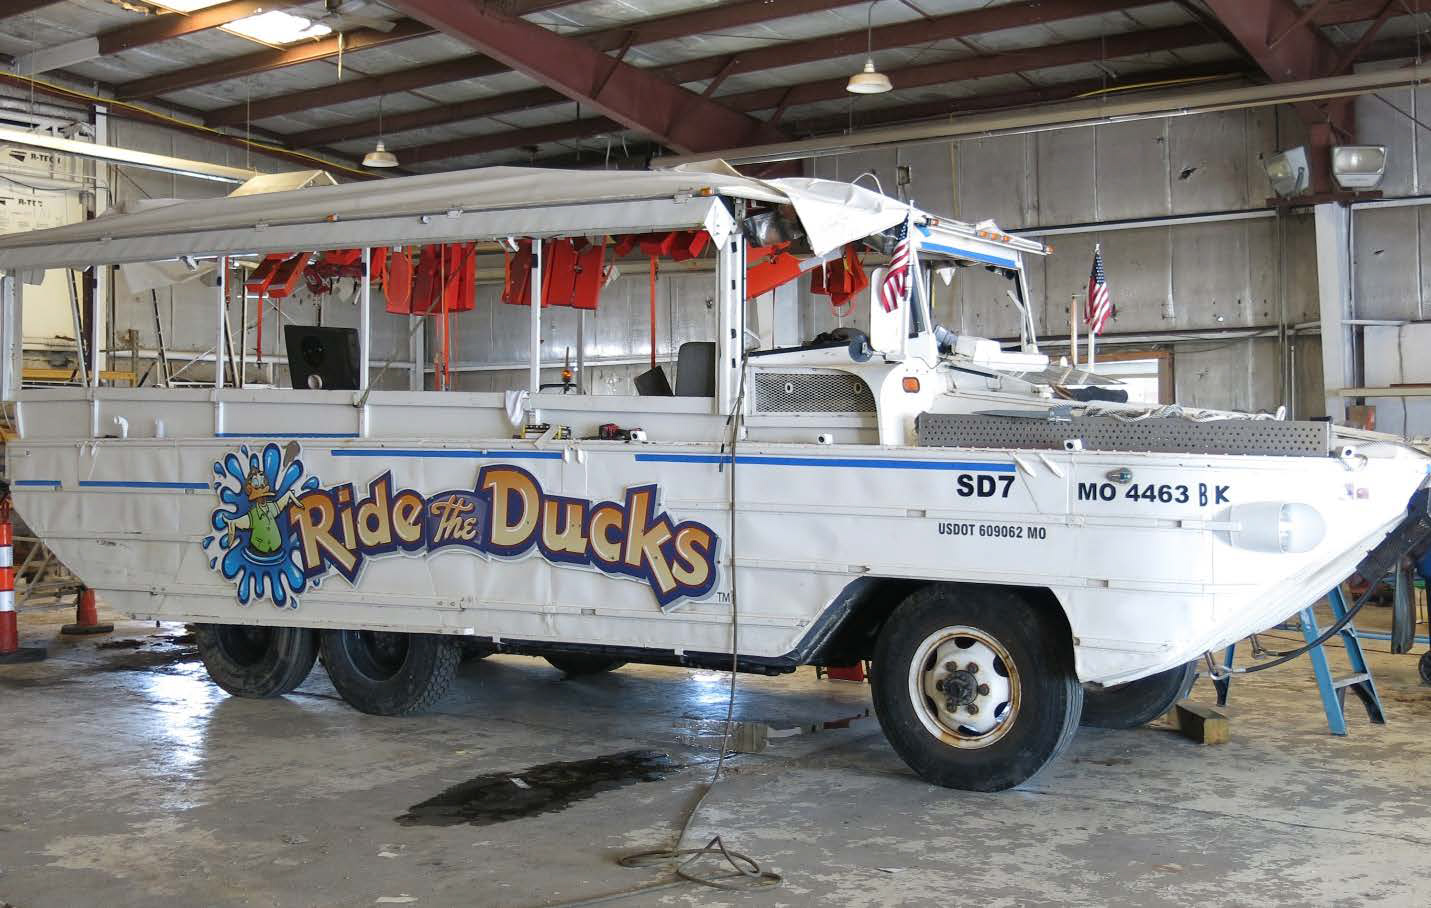 Photo of Stretch Duck 7 after being recovered from Table Rock Lake following the sinking.